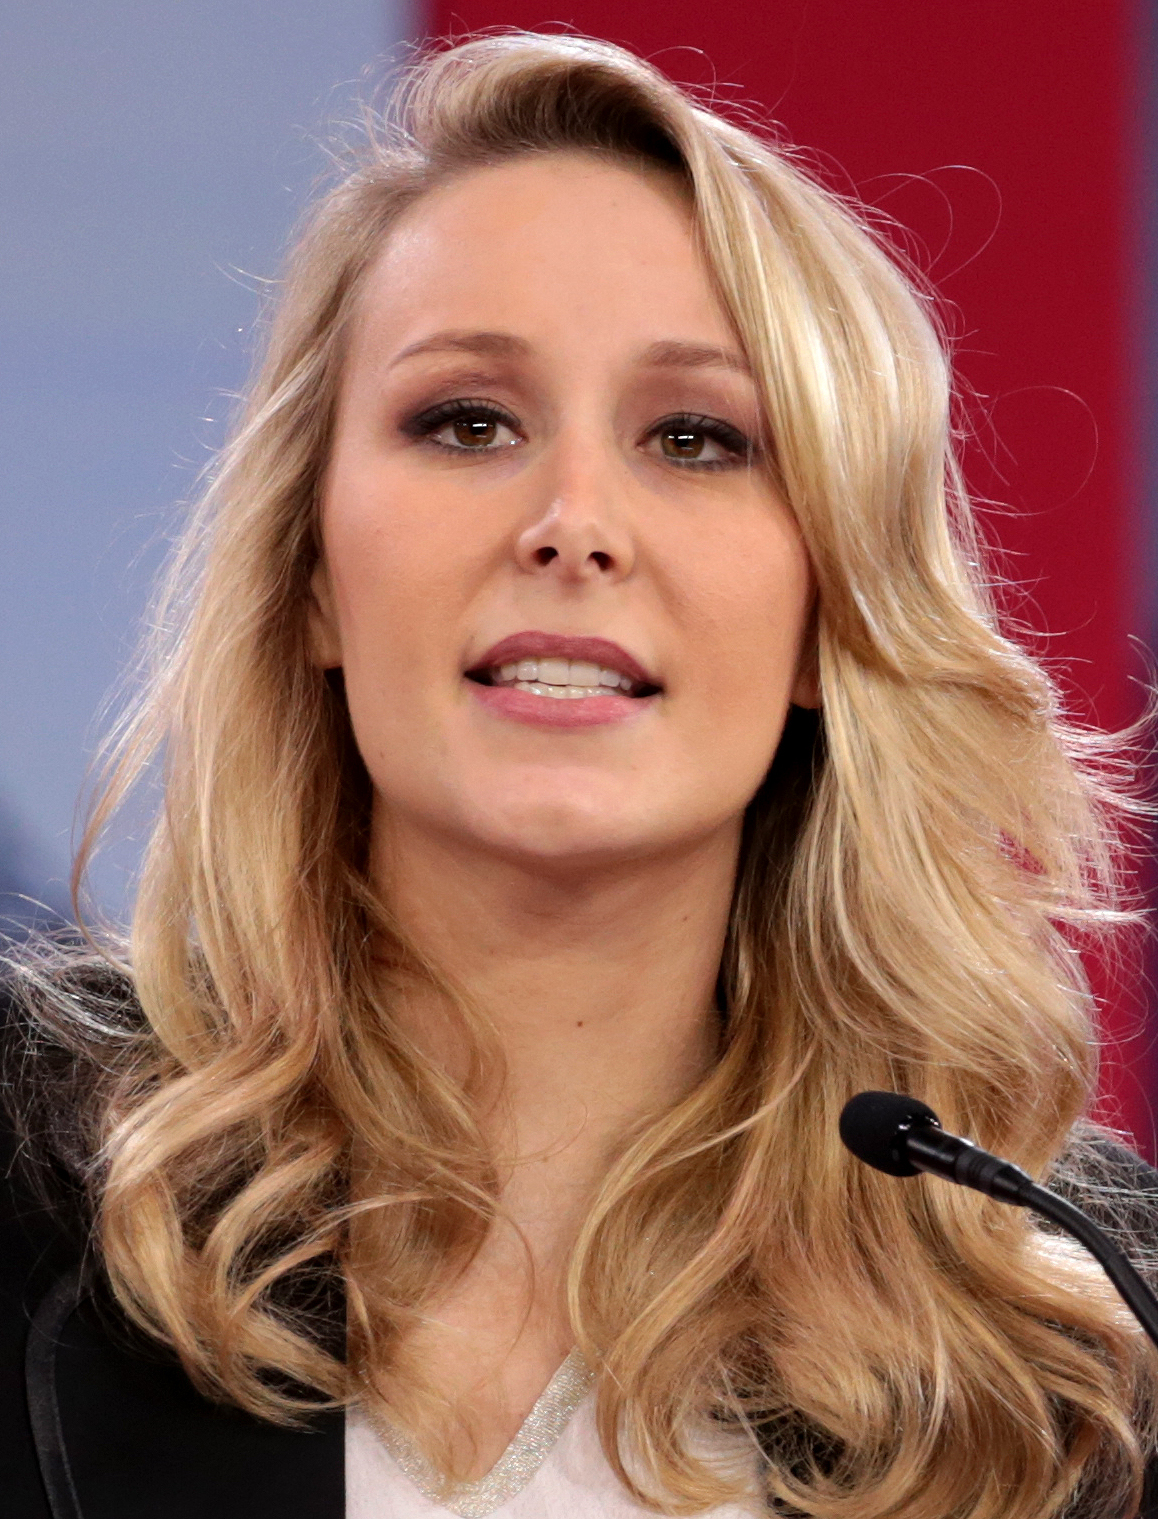 Marion MarechalBy Gage Skidmore from Peoria, AZ, United States of America - Marion Maréchal-Le Pen, CC BY-SA 2.0, https://commons.wikimedia.org/w/index.php?curid=66905151